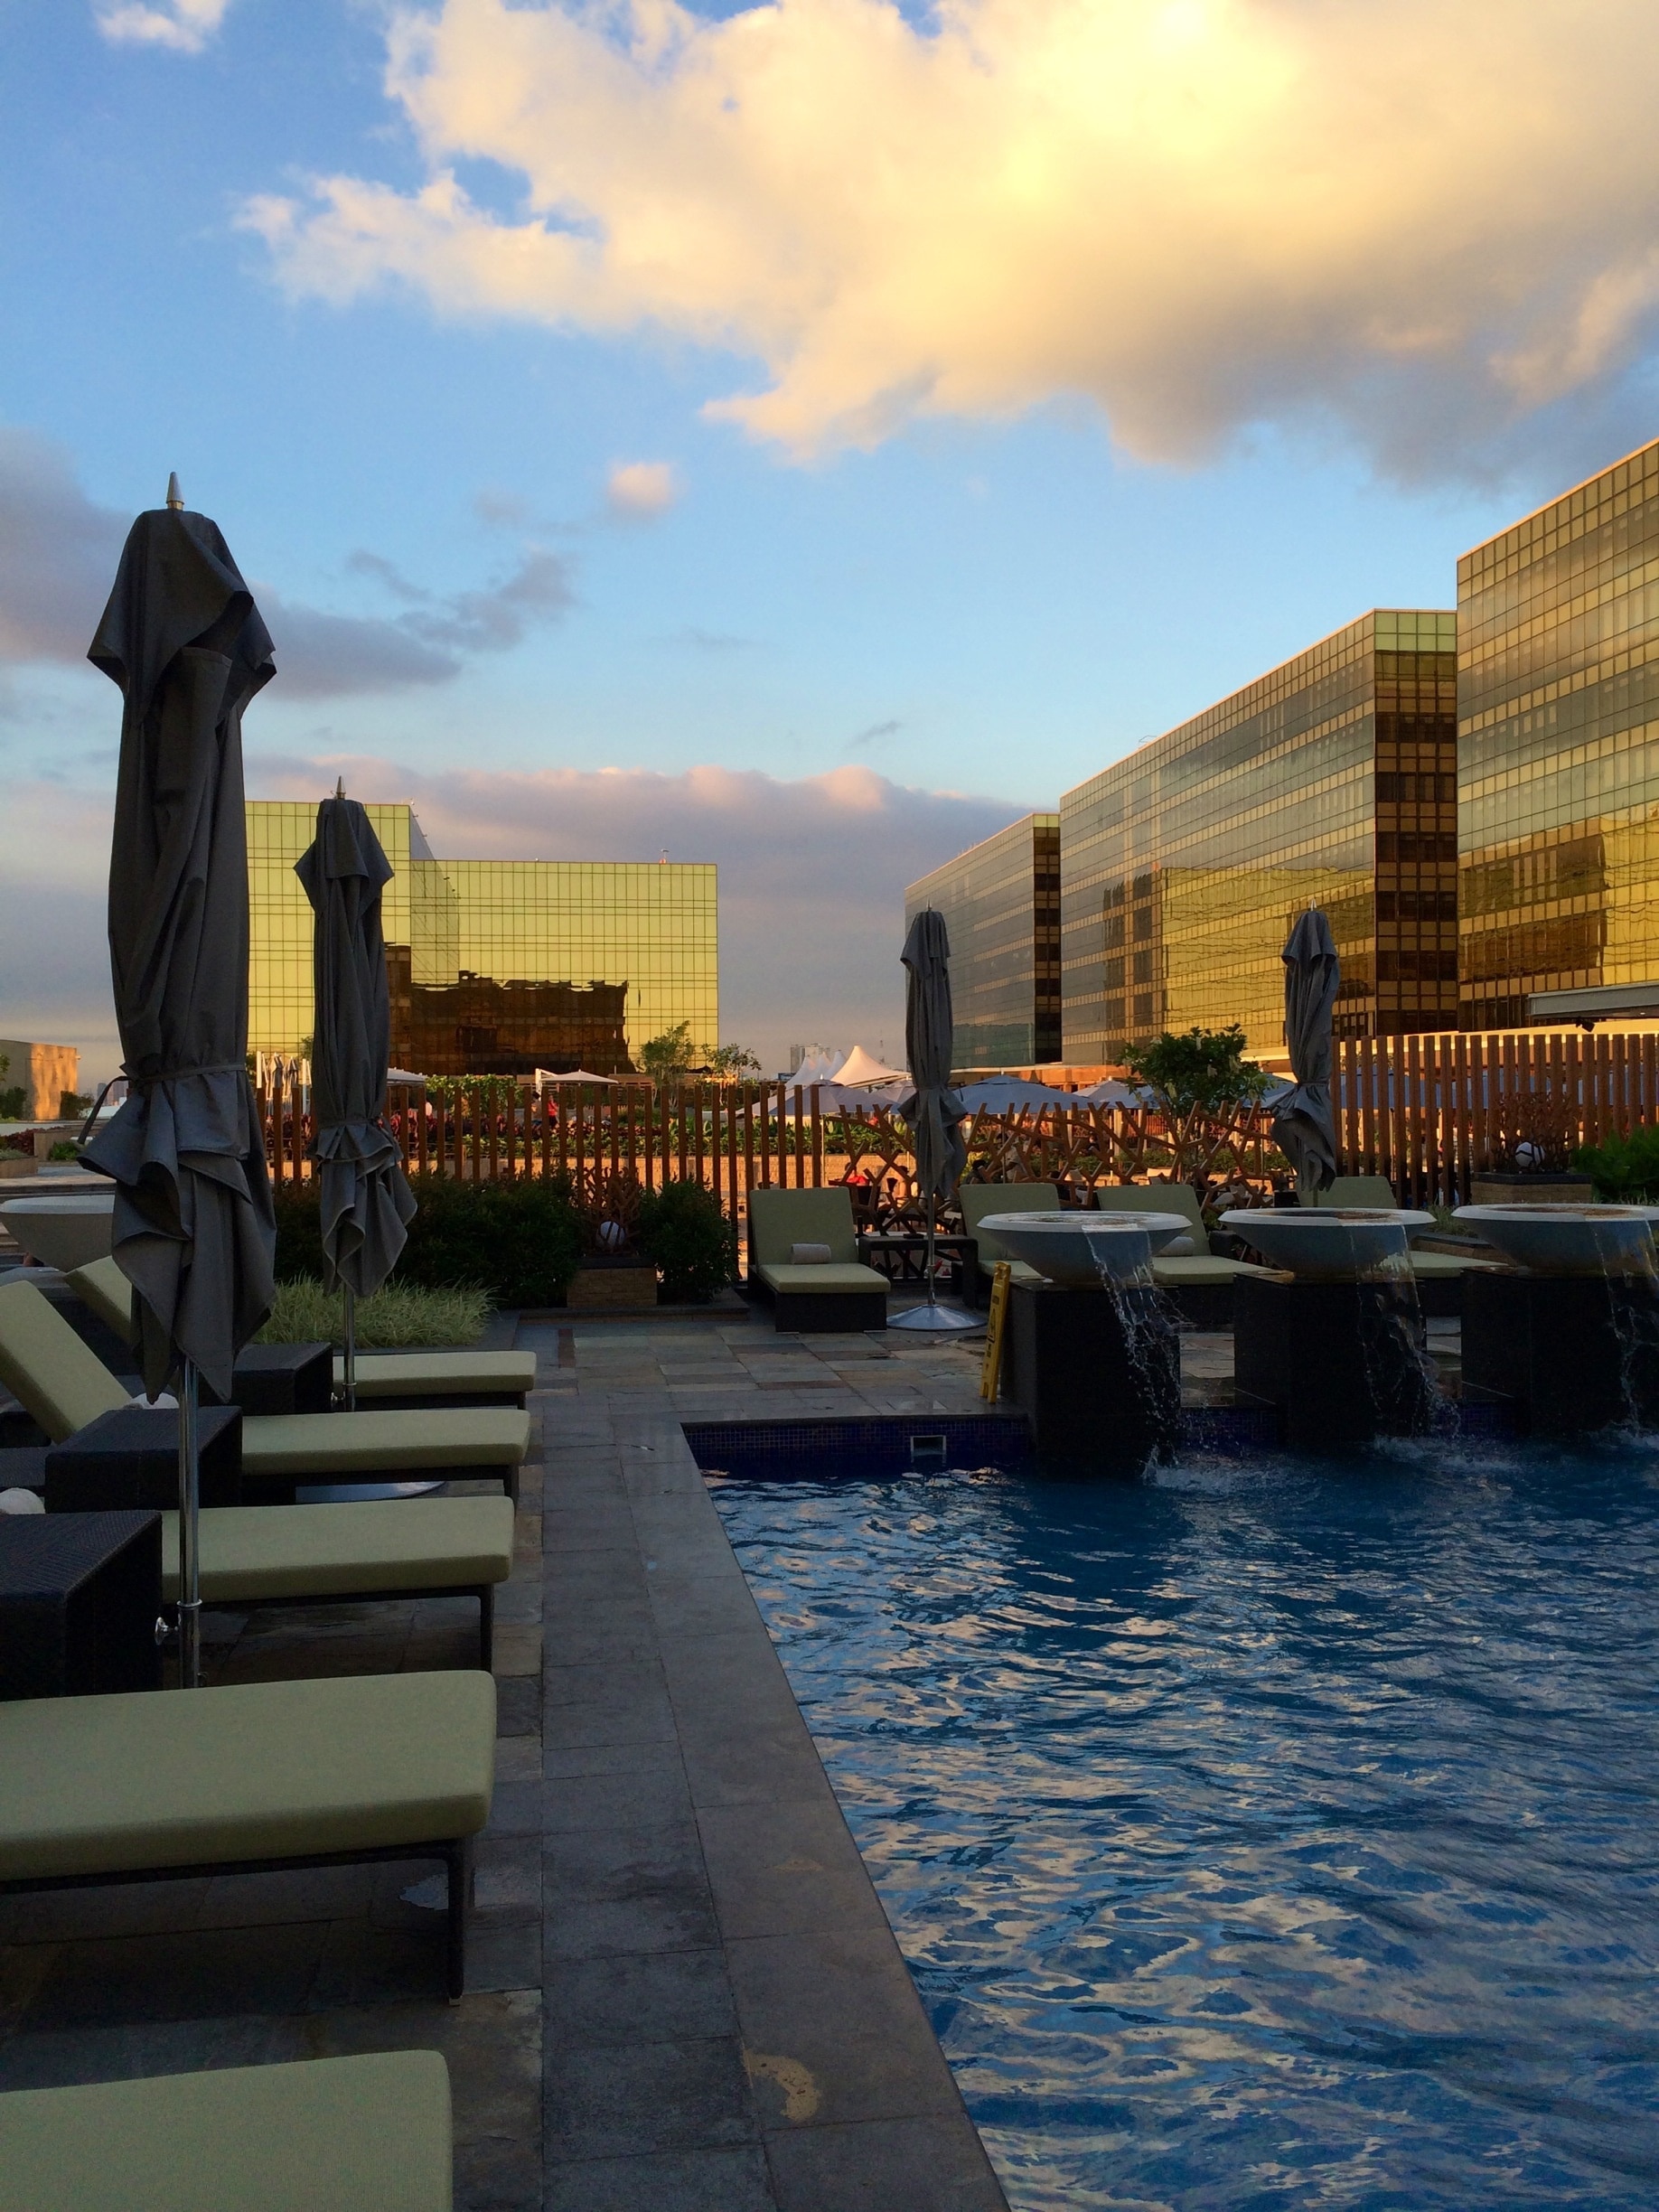 The newest 5 star hotel and resort/casino in the capital city, enjoying pool side and the warmer weather.